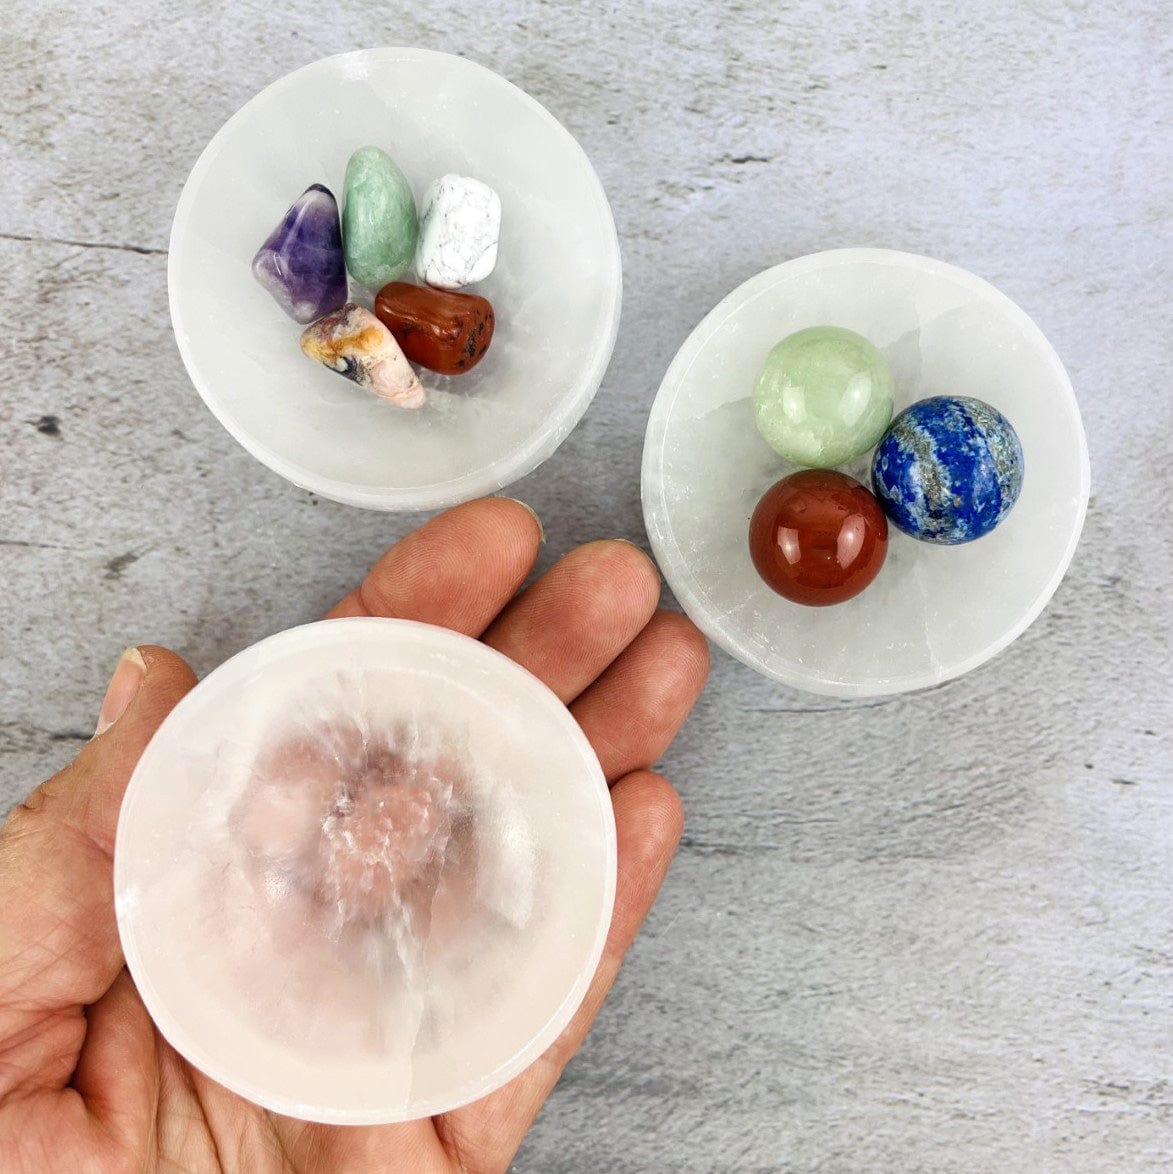 3 Selenite Bowl - 6-7cm - Charging Stations with stones in them, and 1 in a hand for size